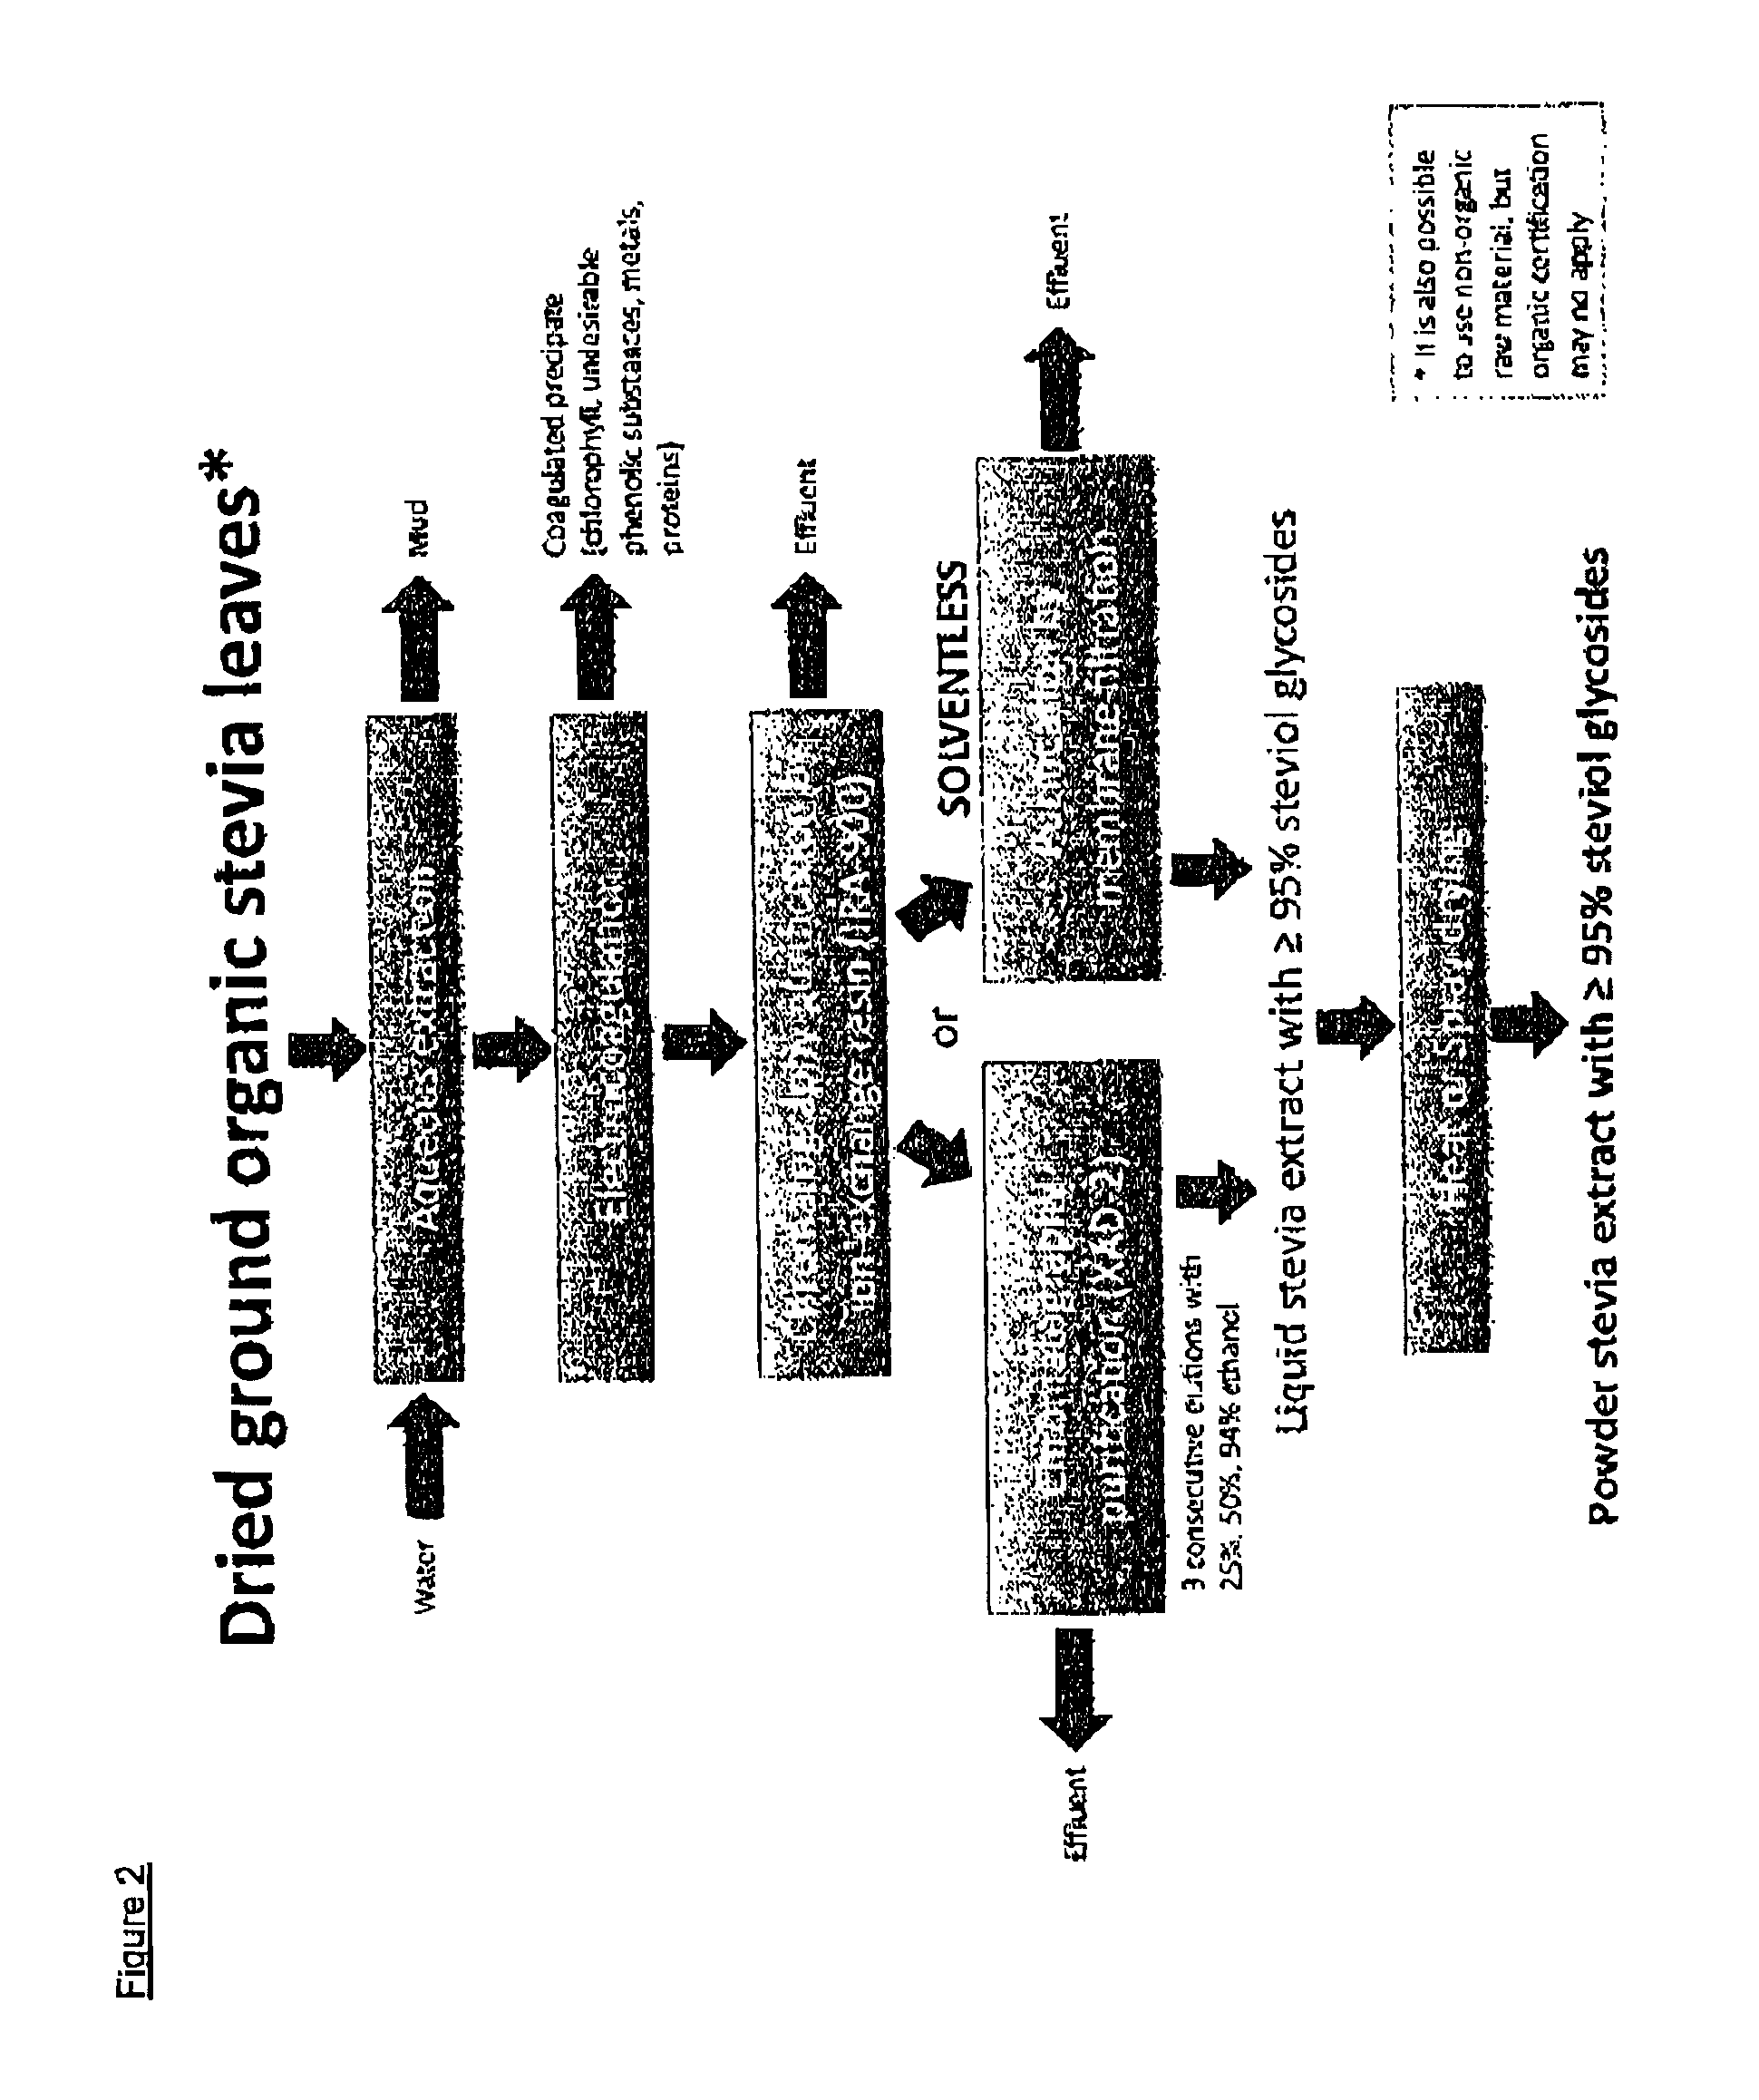 Extraction method for providing an organic certifiable Stevia rebaudiana extract